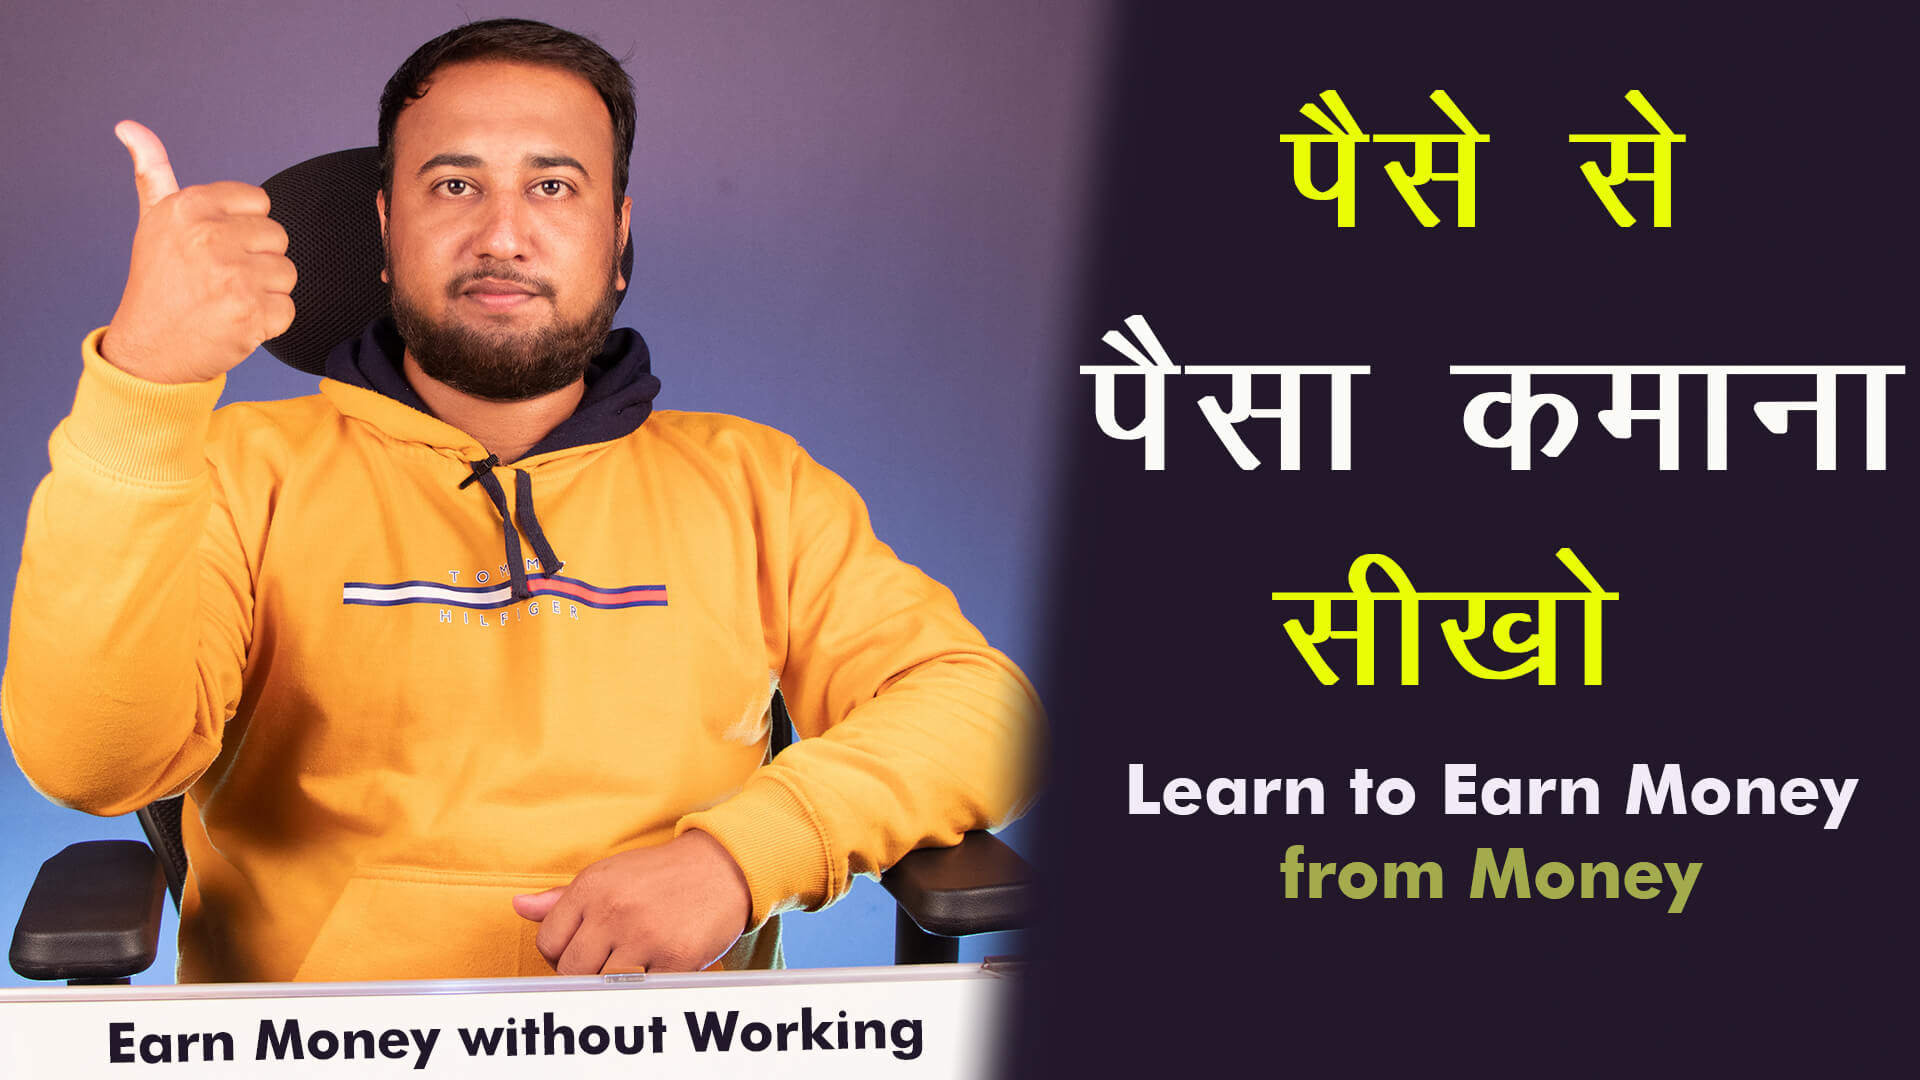 You are currently viewing बिना काम किए अमीर कैसे बनें? How to Become Rich without Working? Money Management Tips in Hindi